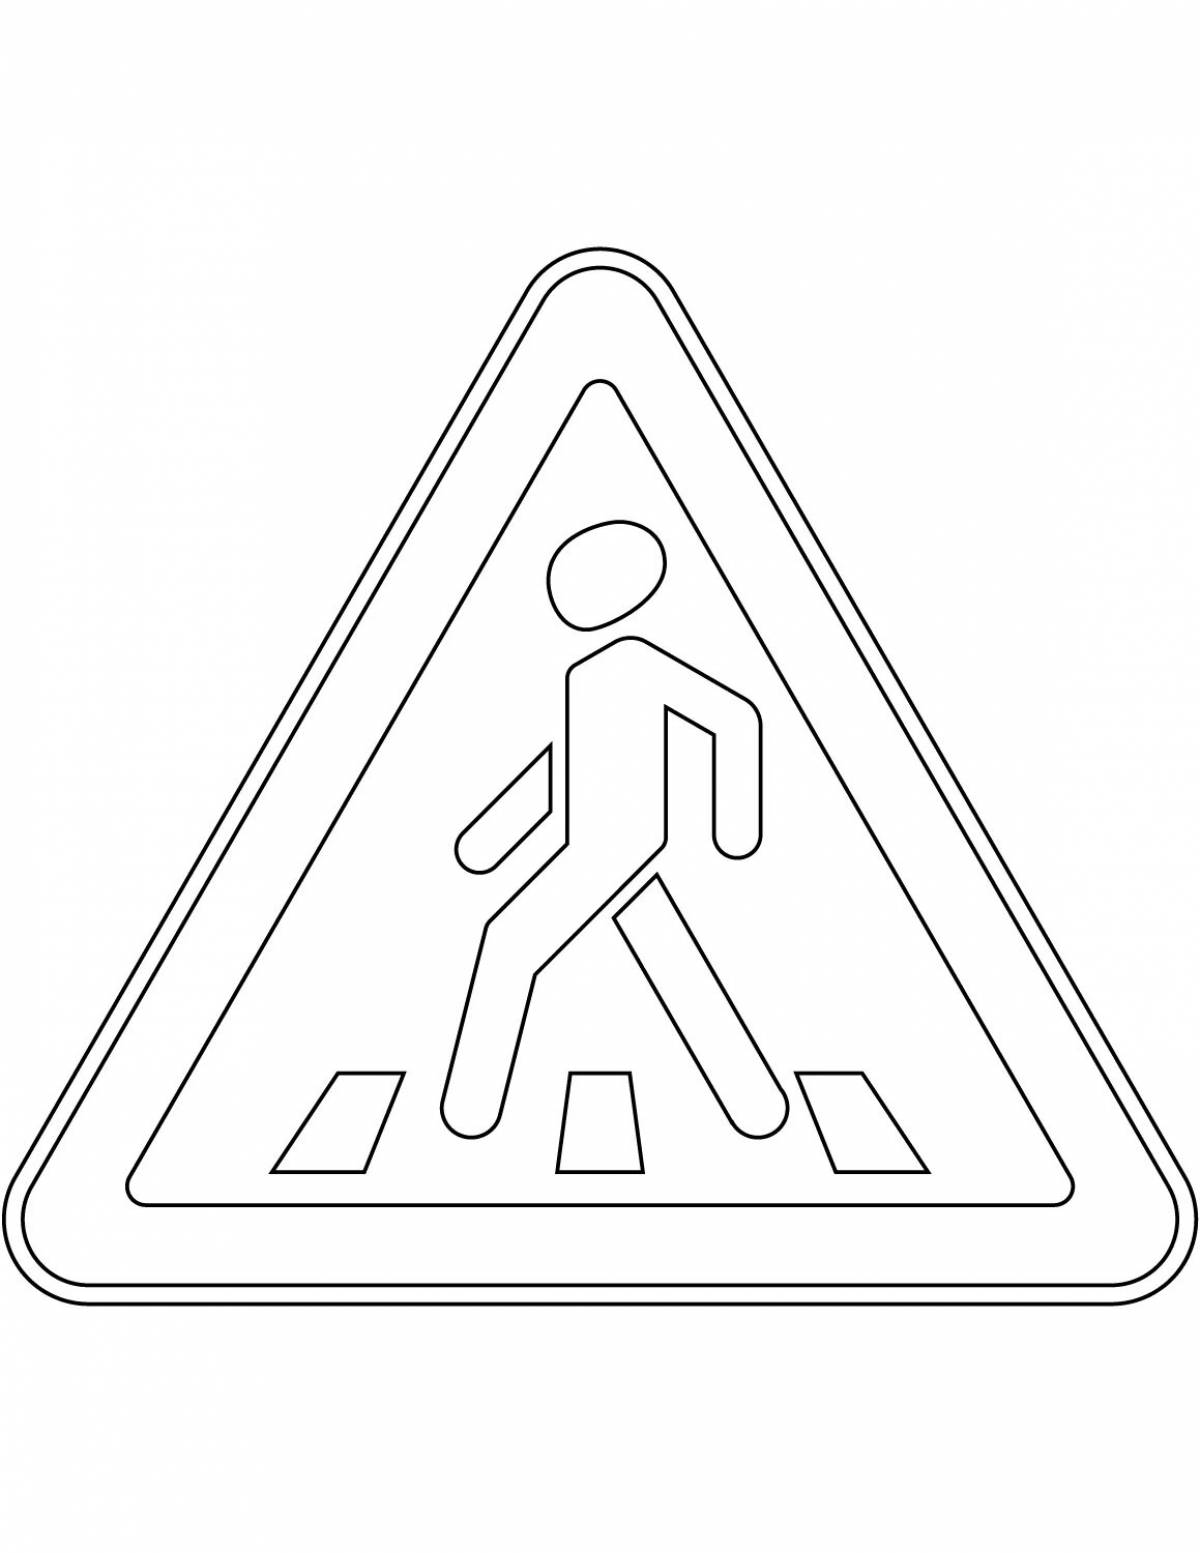 Coloring thin pedestrian signs